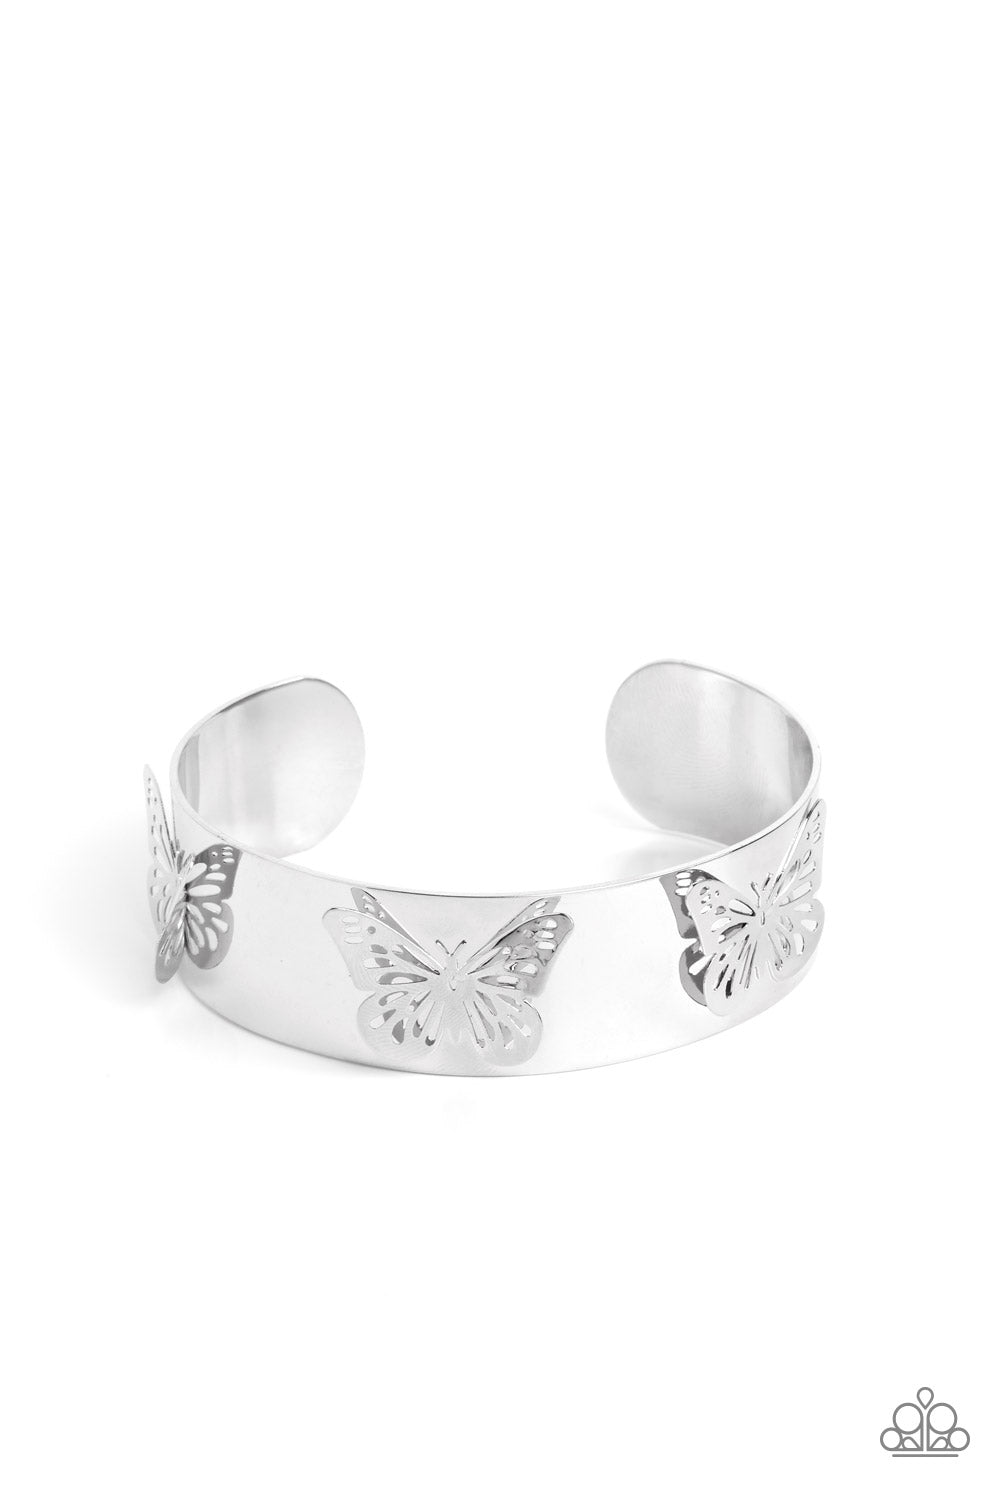 Magical Mariposas - Silver Butterfly Bracelet - Paparazzi Accessories - Three shimmery silver butterflies flutter atop the wrist on a thick silver cuff for a whimsical finish. Sold as one individual bracelet.